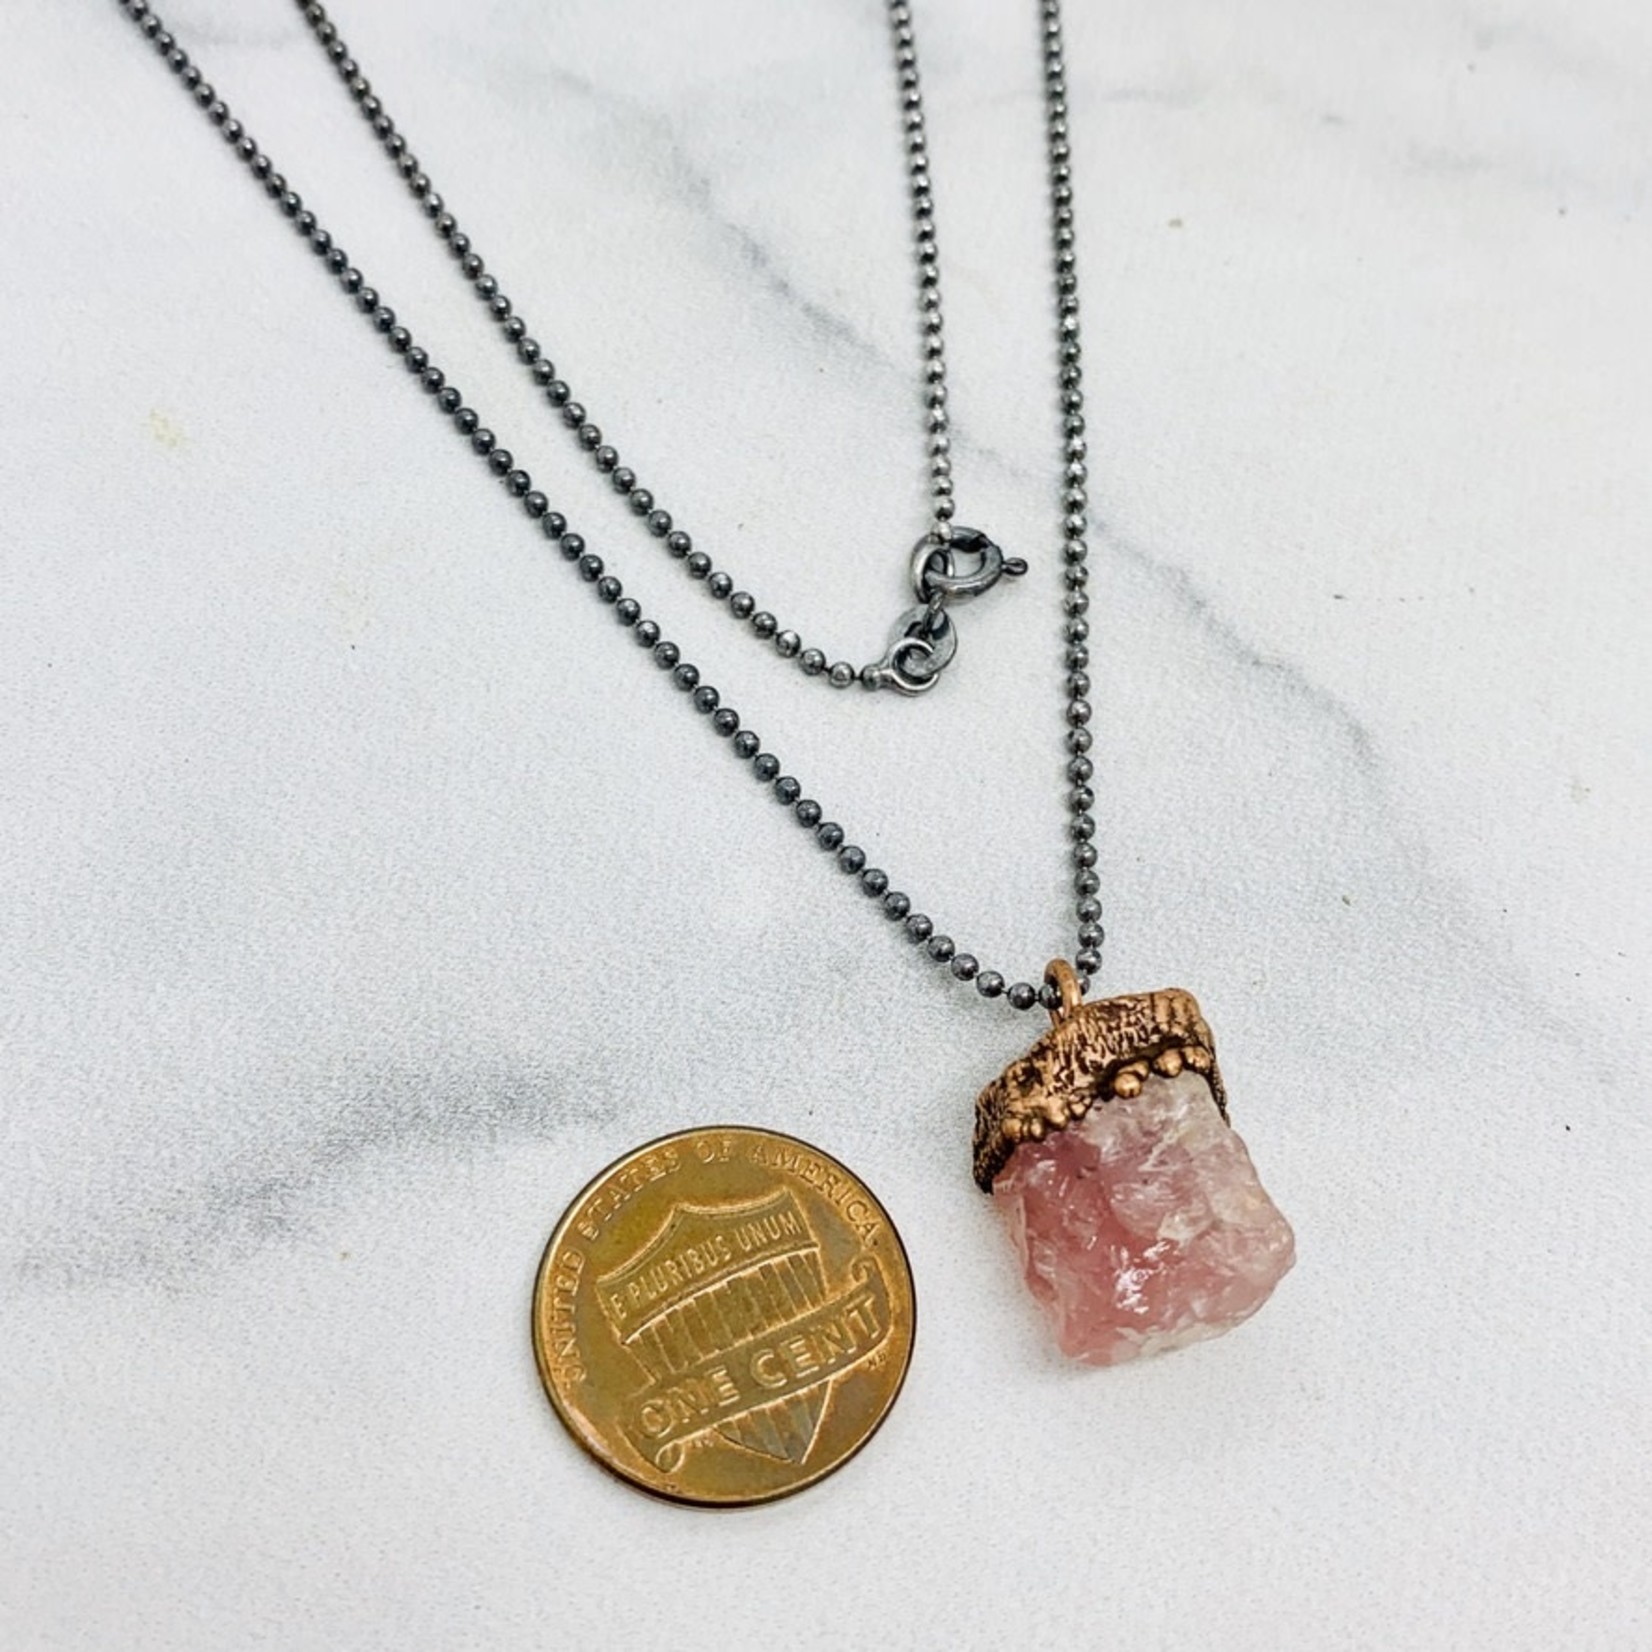 Raw Rose Quartz Electroformed Druzy Pendant on 18” Oxidized Faceted Ball Chain Necklace